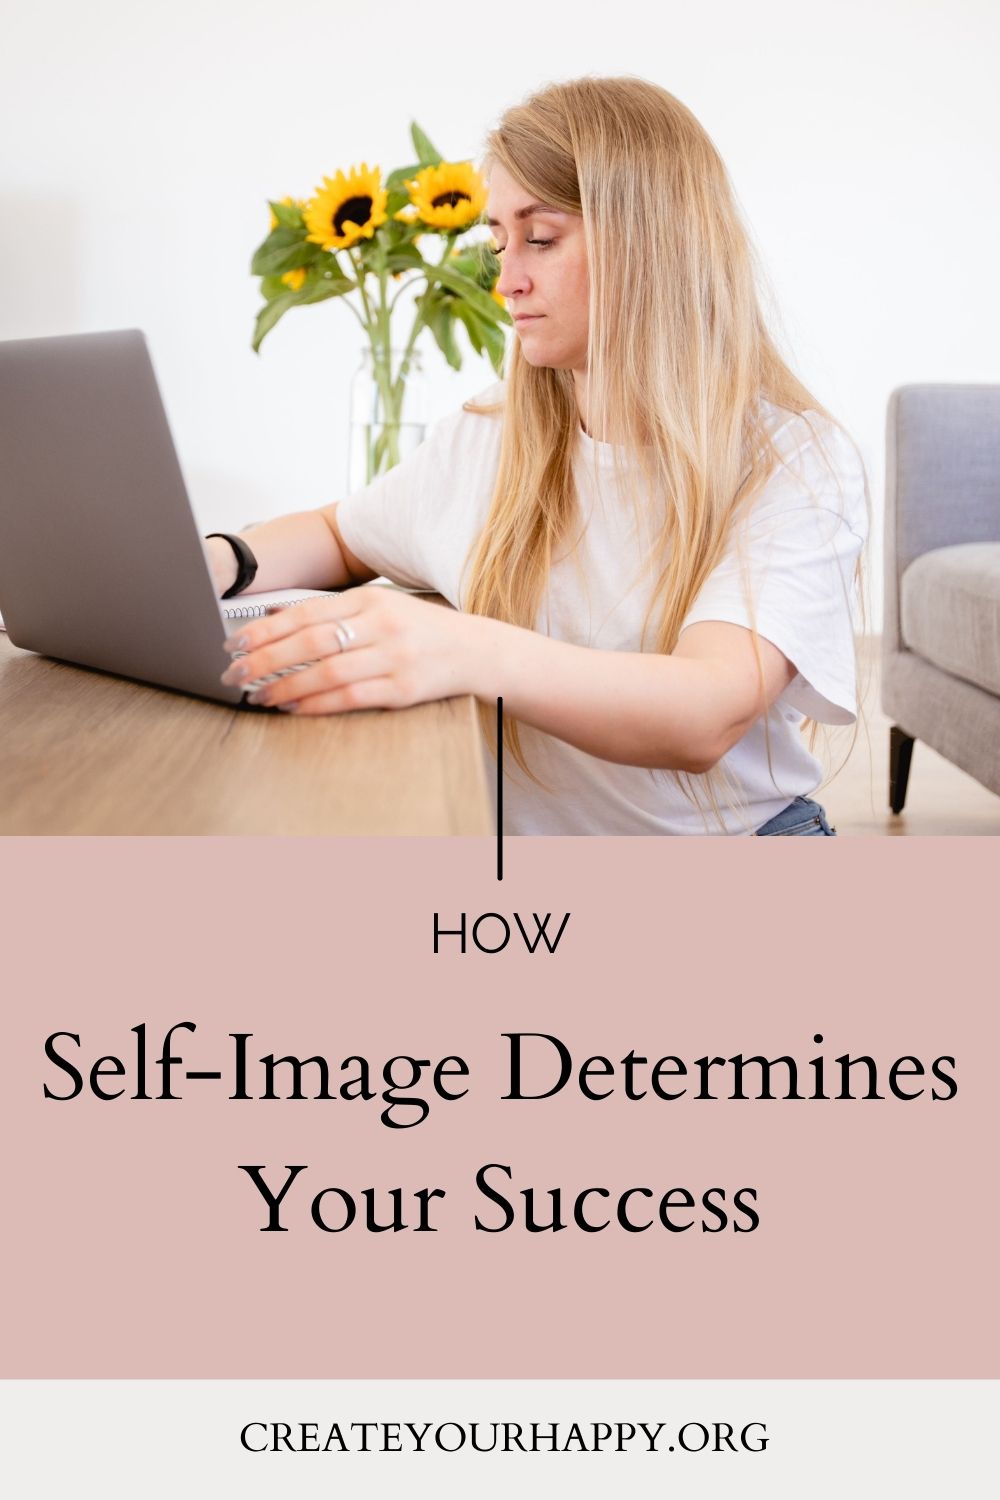 How Self-Image Determines Your Success